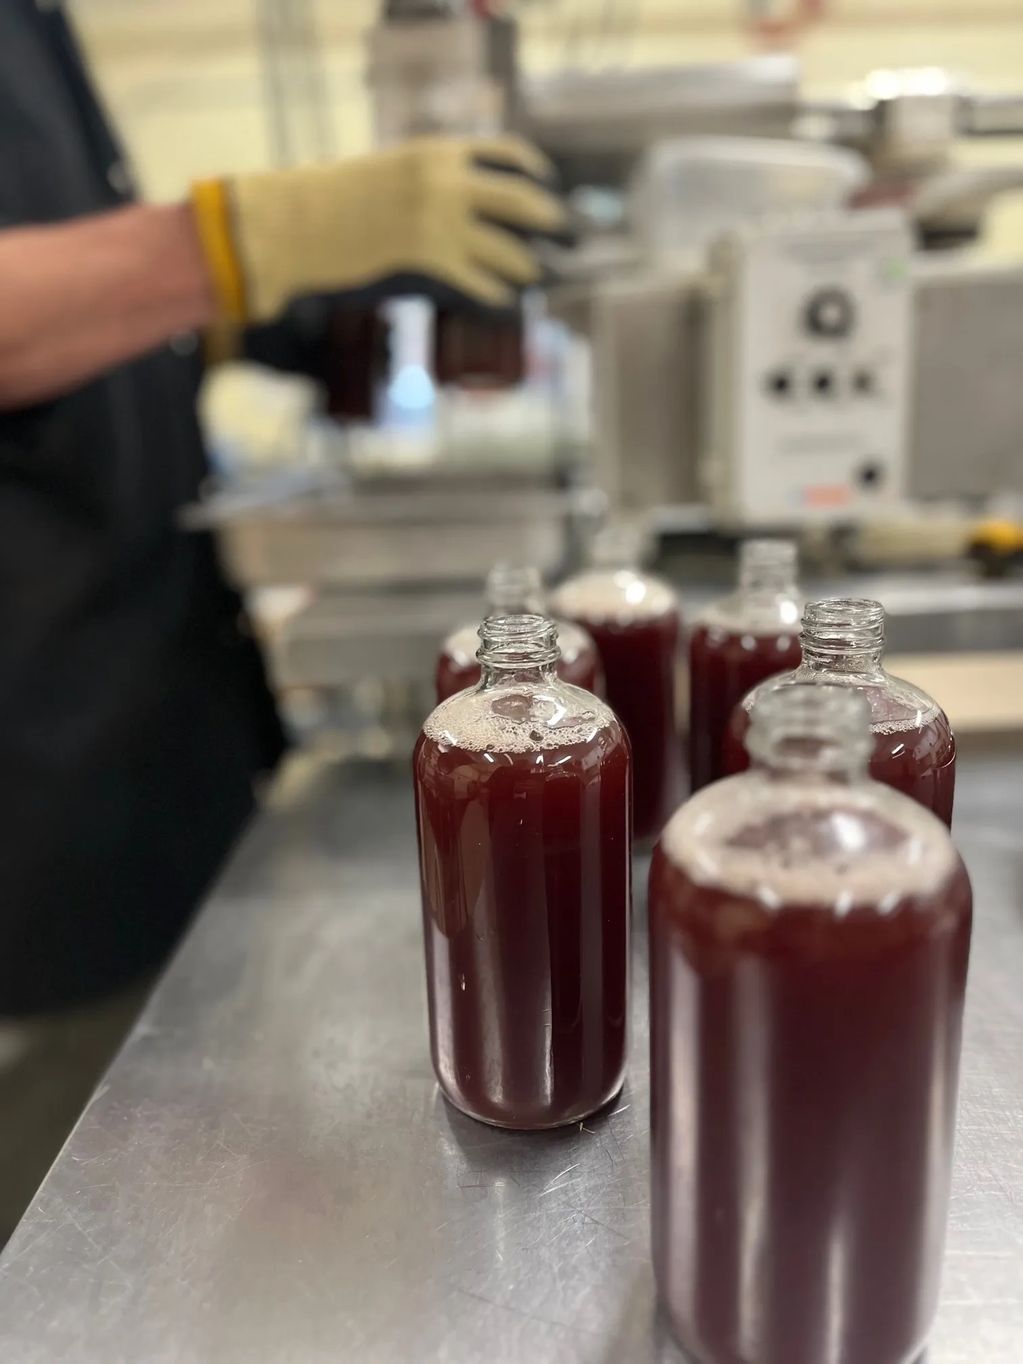 The bottling process is long and labor-intensive.